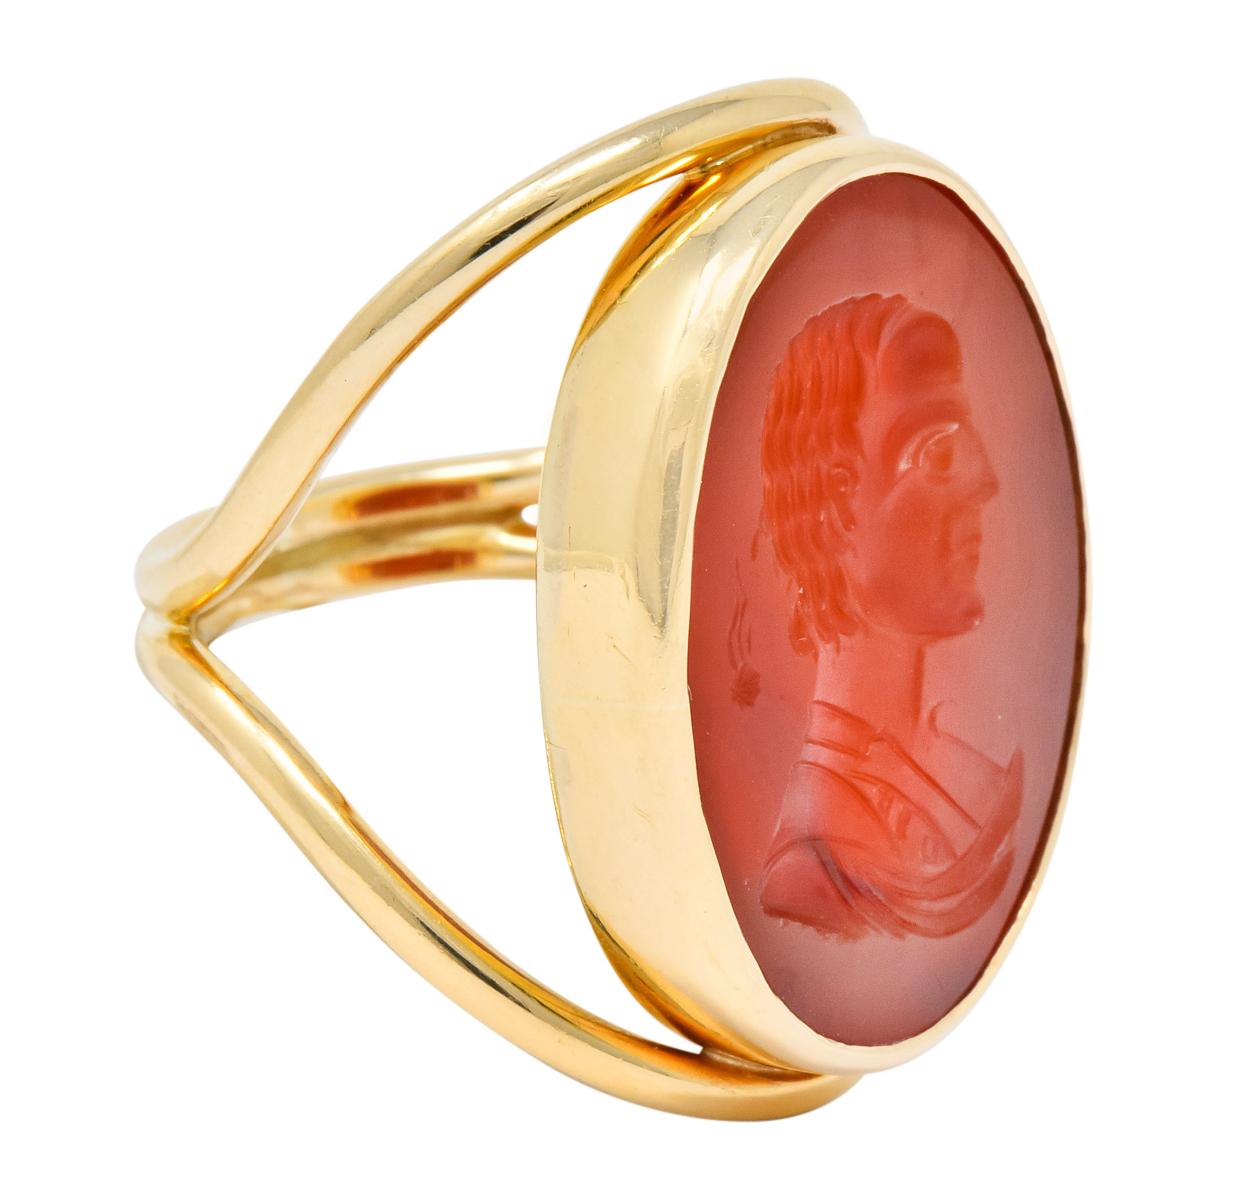 Centering a bezel set carnelian intaglio depicting the silhouette of a man with a small celestial symbol

Deeply carved intaglio measures 29 mm x 19 mm

Presented in a stylized simplistic high polished 14 karat gold mounting

Tested as 14 karat gold